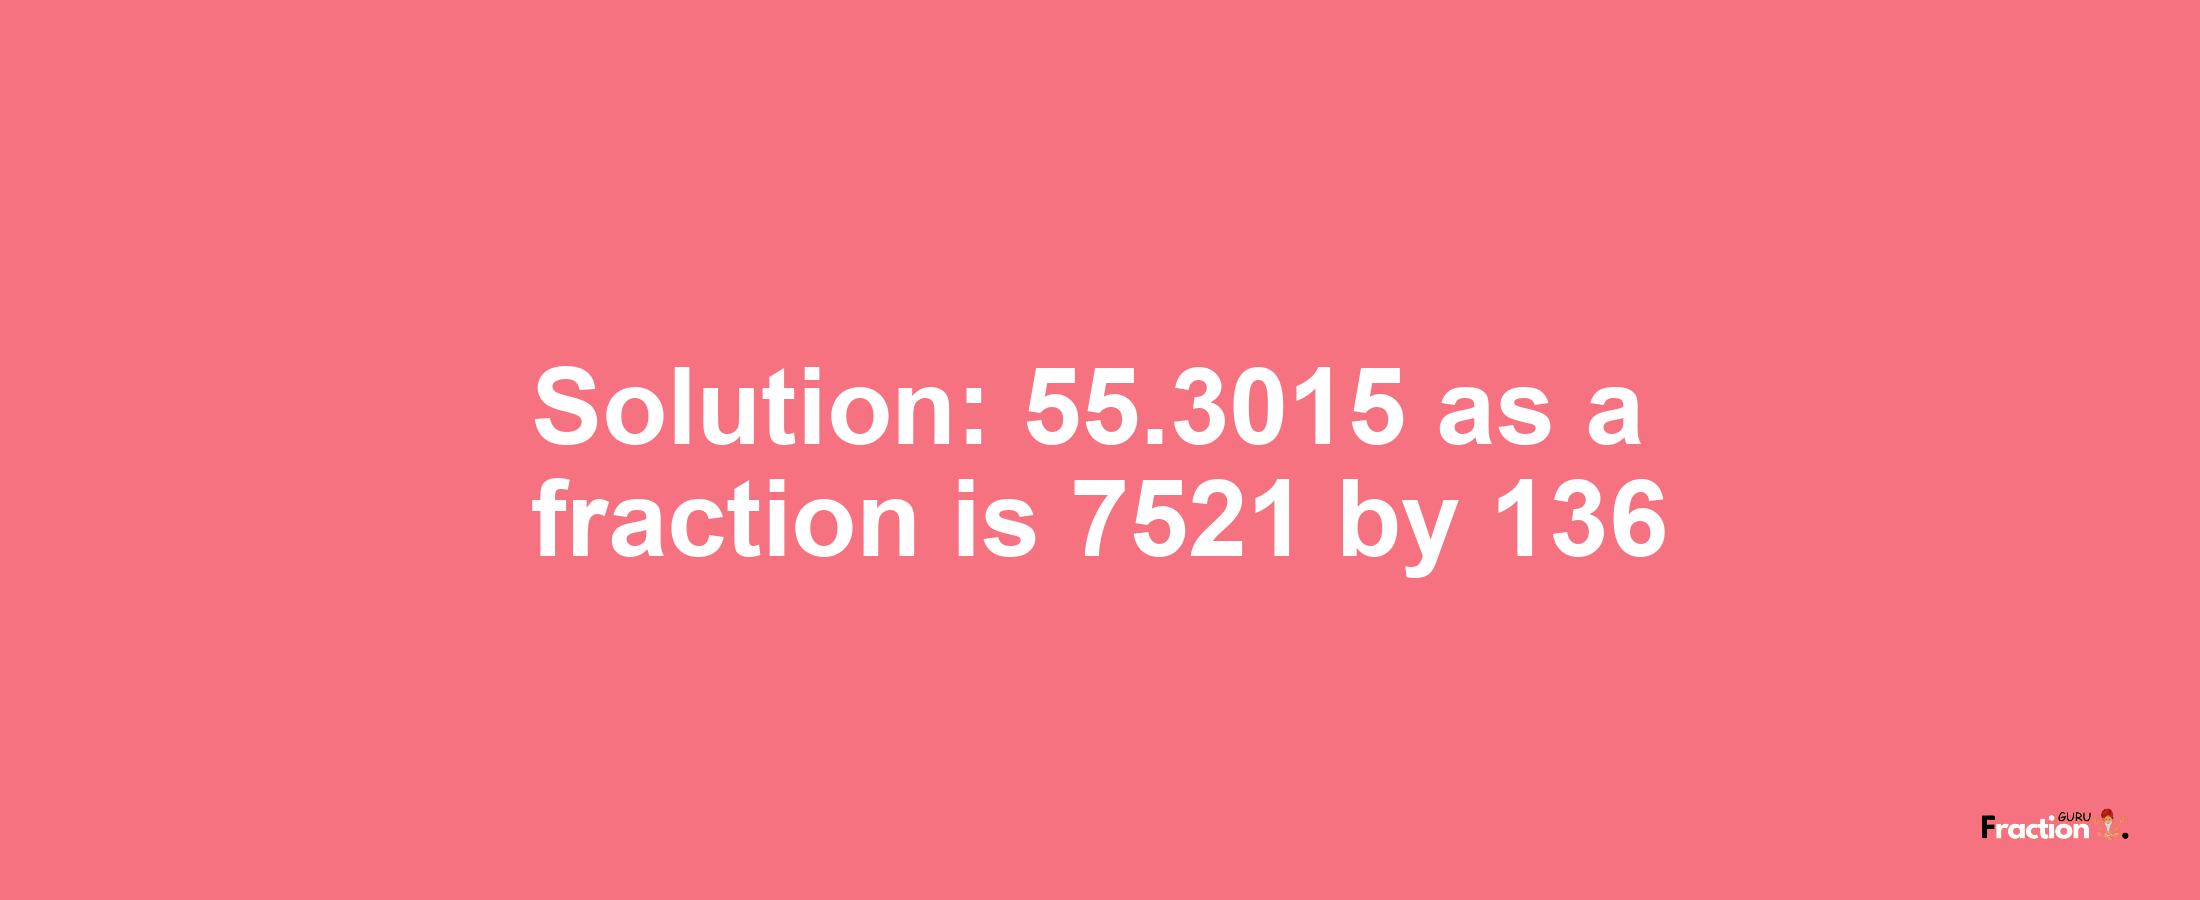 Solution:55.3015 as a fraction is 7521/136